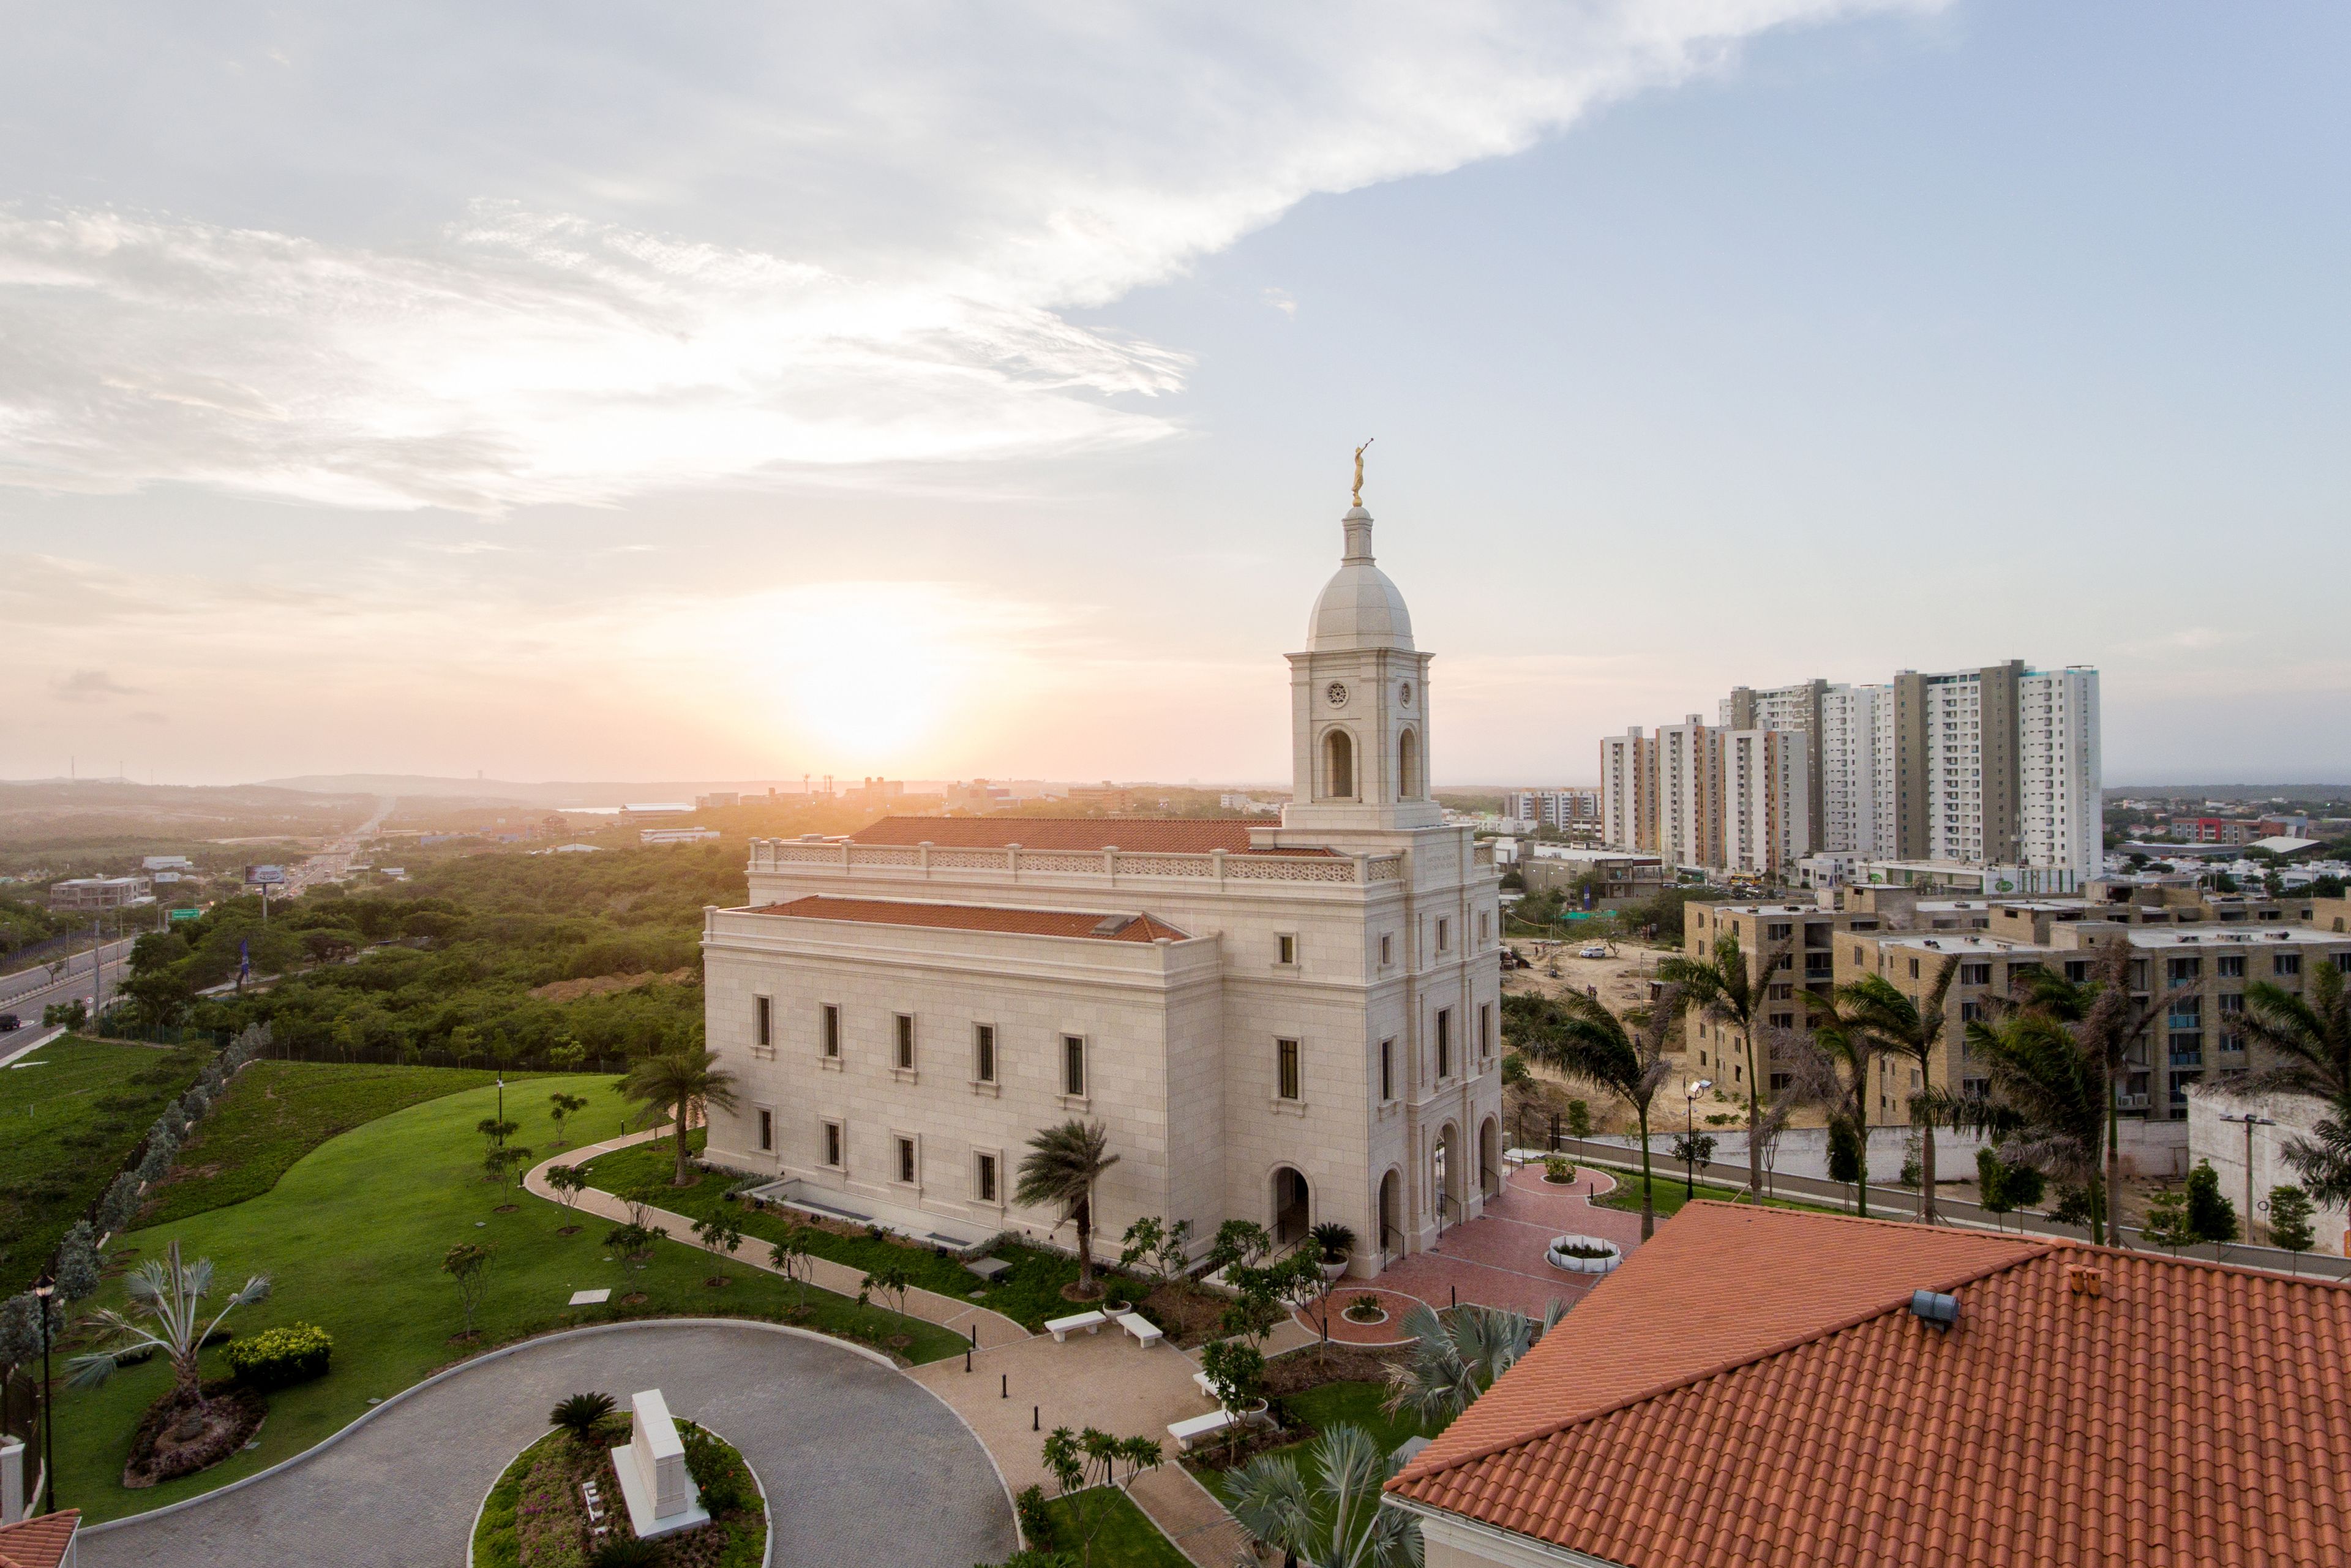 A side view of the entire Barranquilla Colombia Temple, surrounded by landscaping and city buildings.